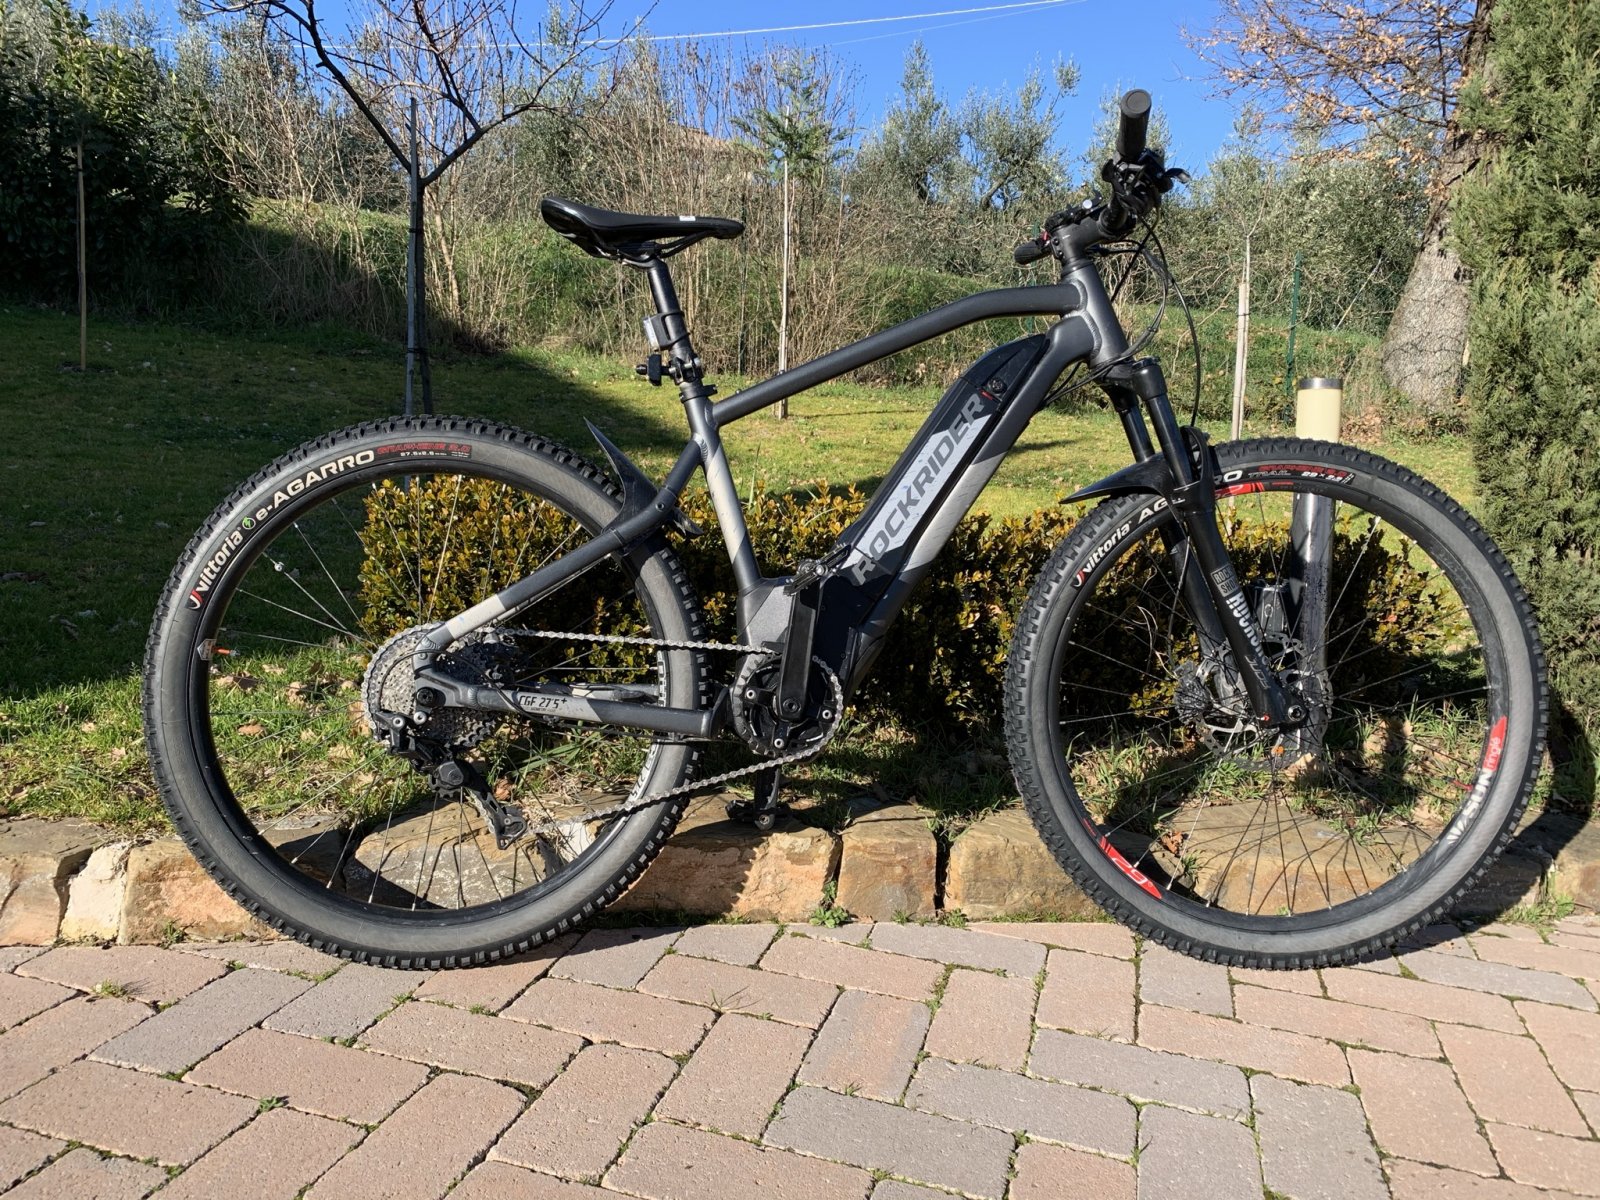 Decathlon Rockrider E-ST 900 electric mountain bike propped against stone patio in garden on sunny day